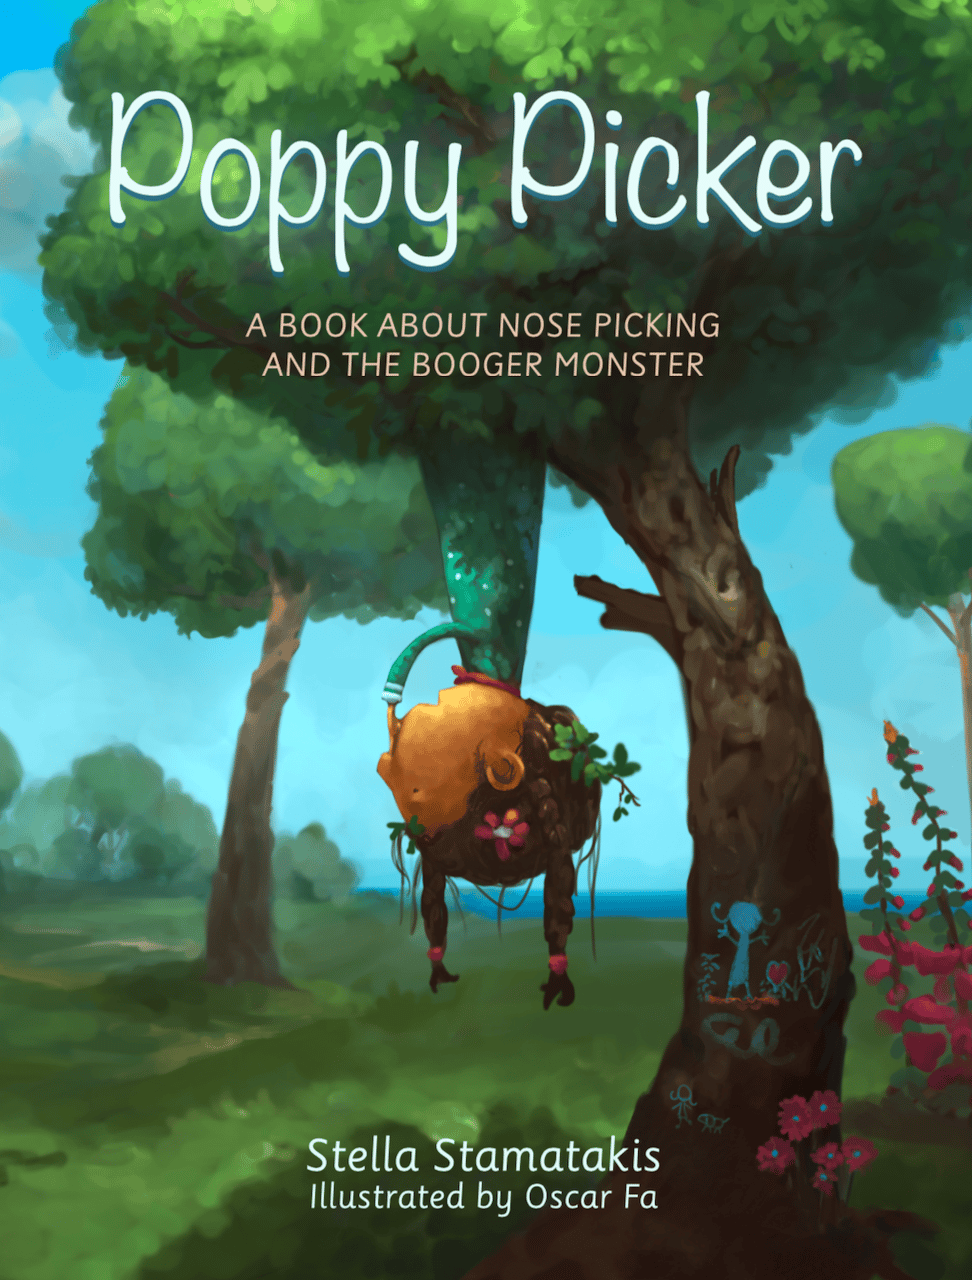 Image of Poppy Picker,  a book about nose picking and the Booger Monster.